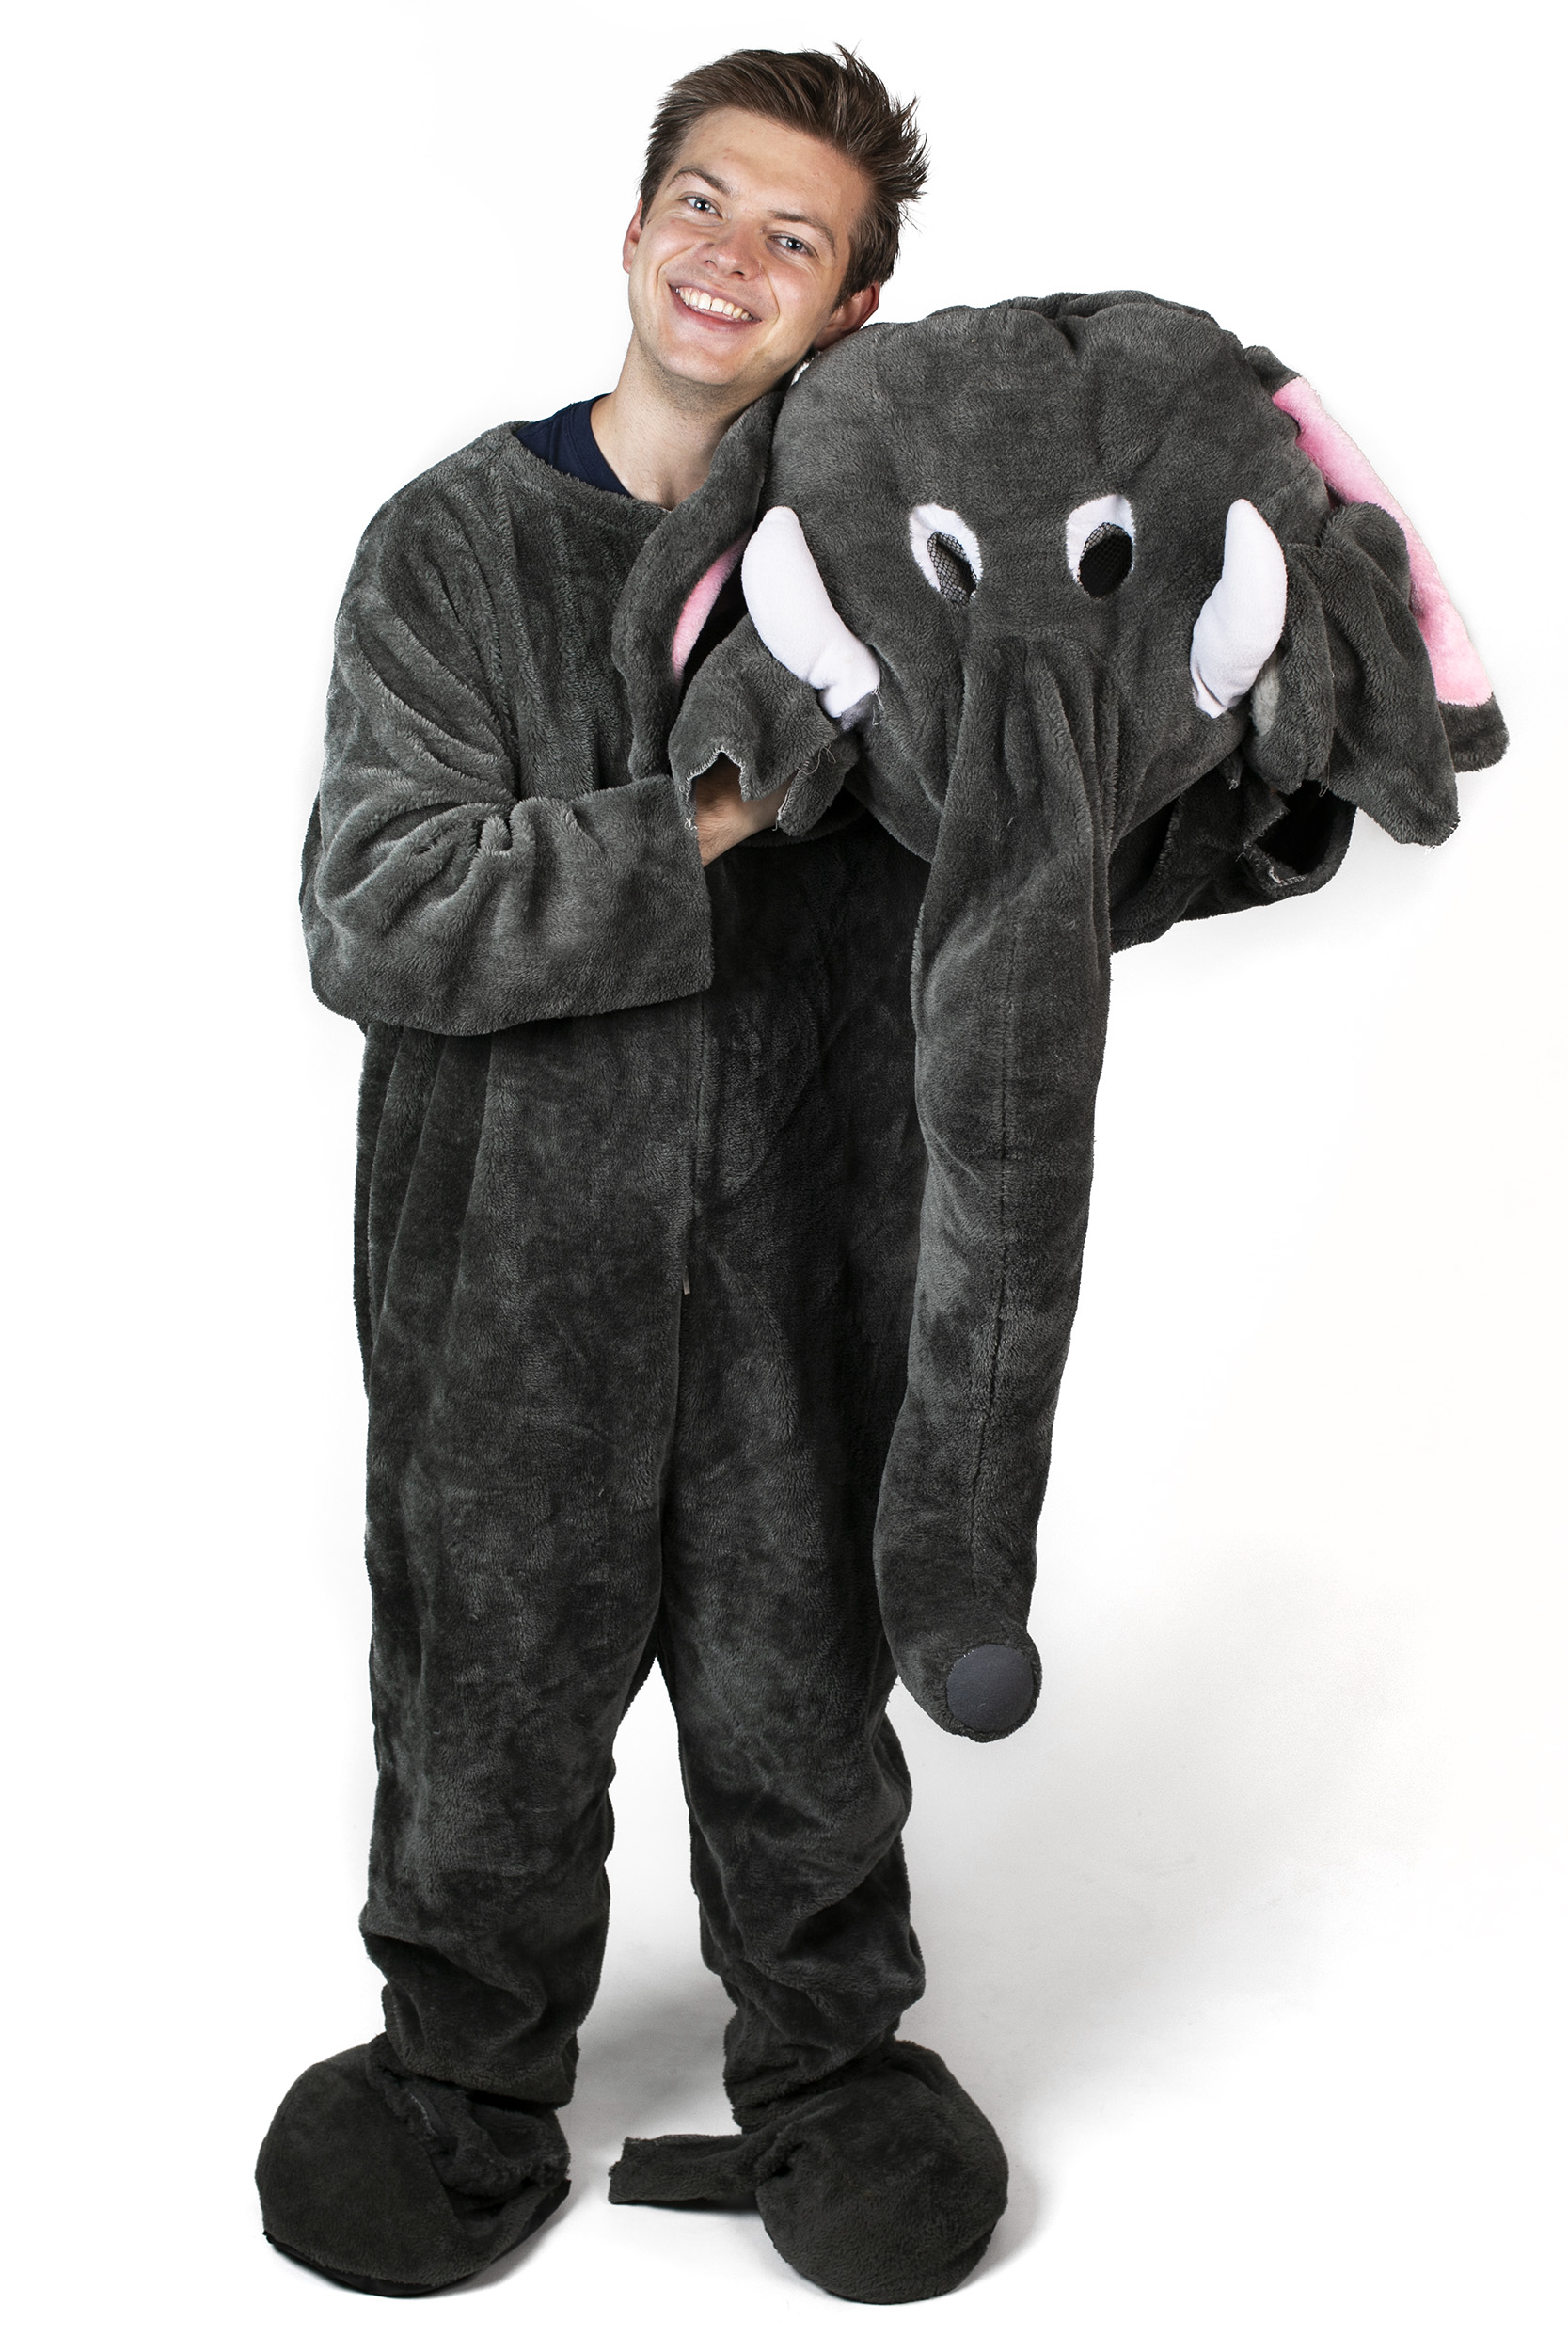 William Flanagan is dressed as an elephant for Eliot House.